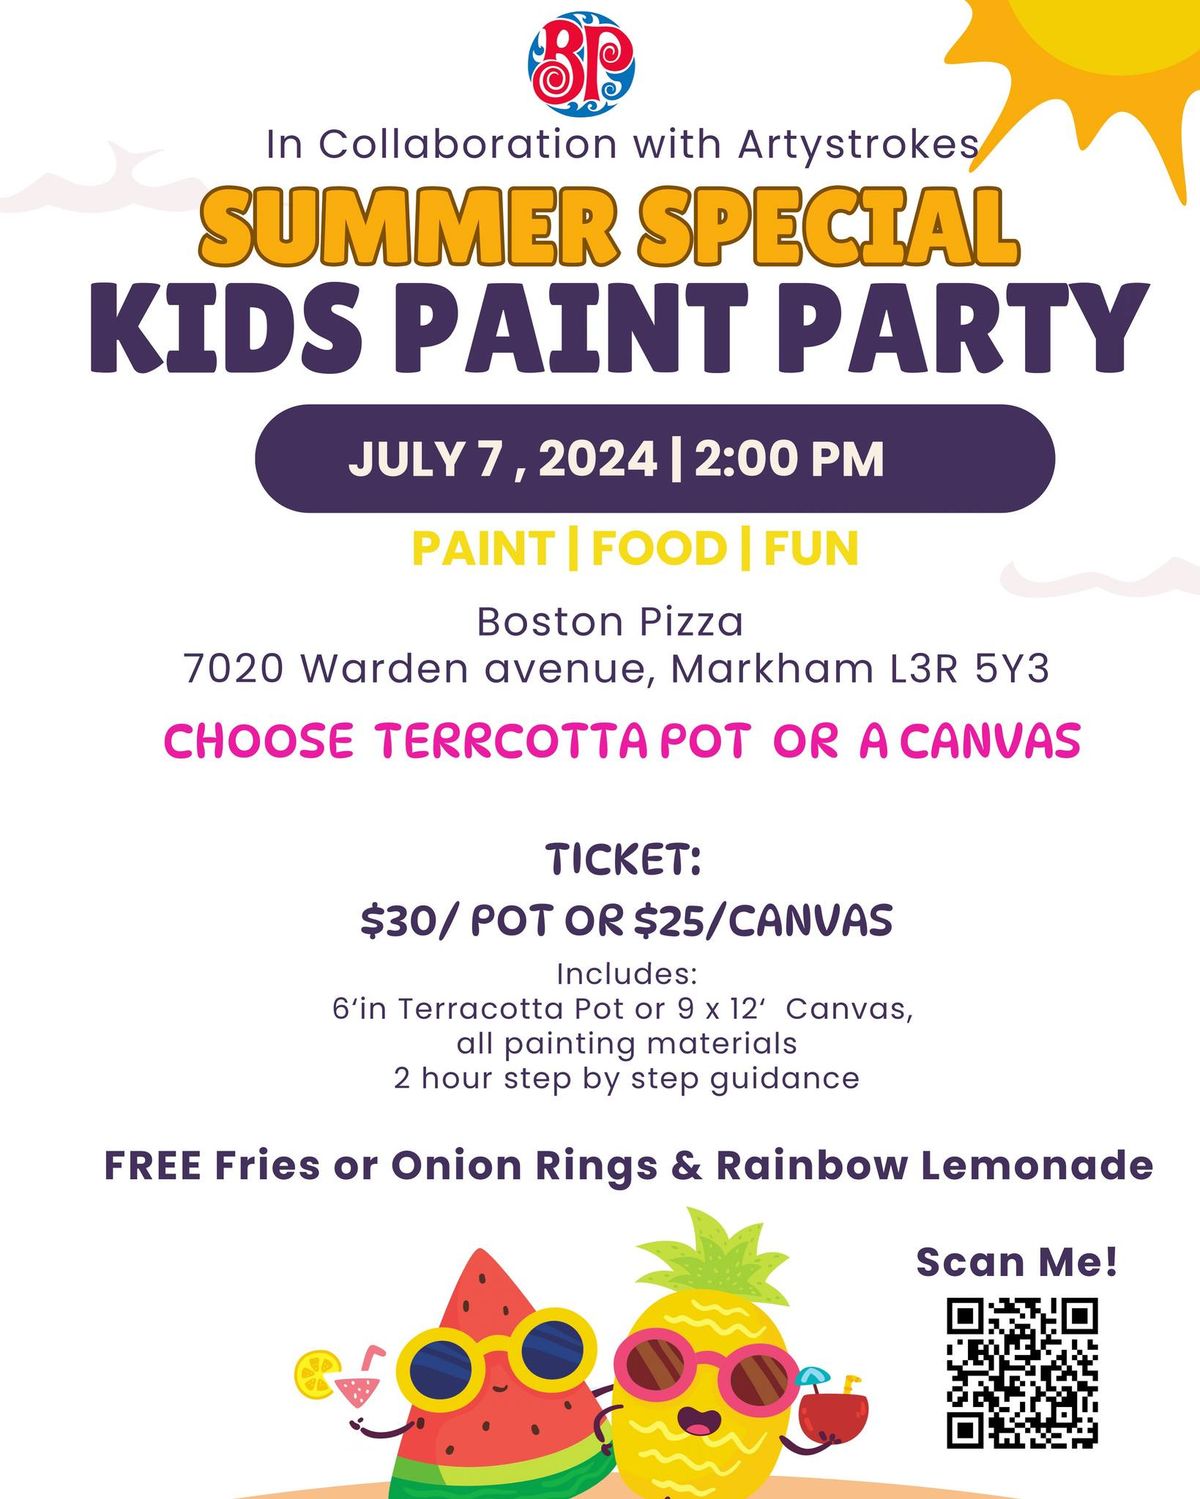 Summer Special Kids Paint Party 